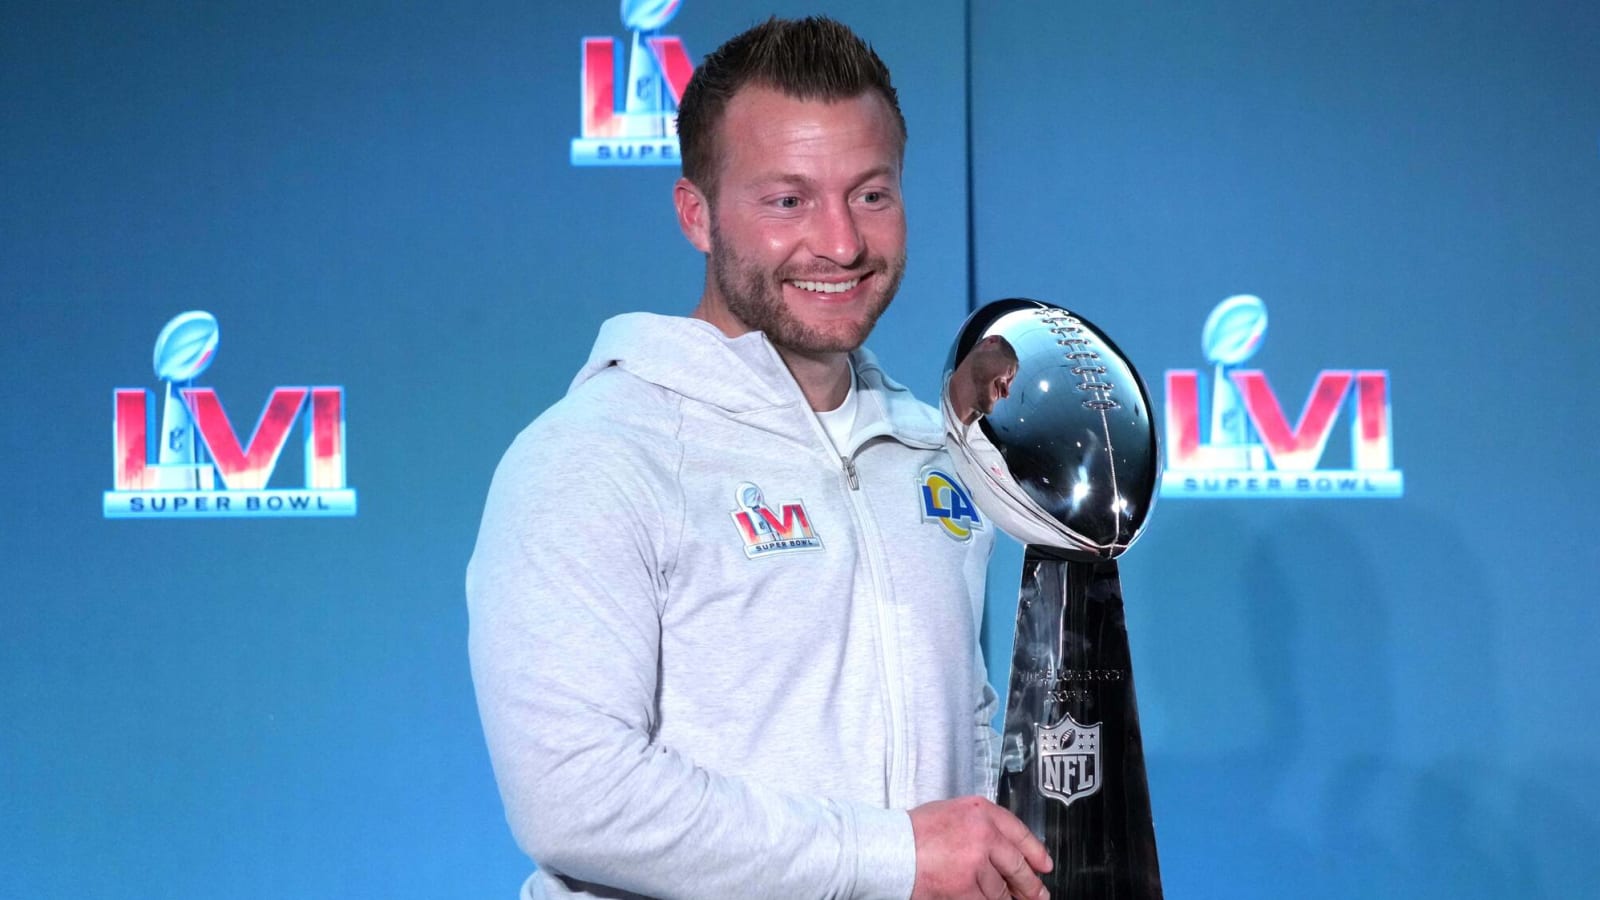 Sean McVay could earn $15M per year as TV analyst?